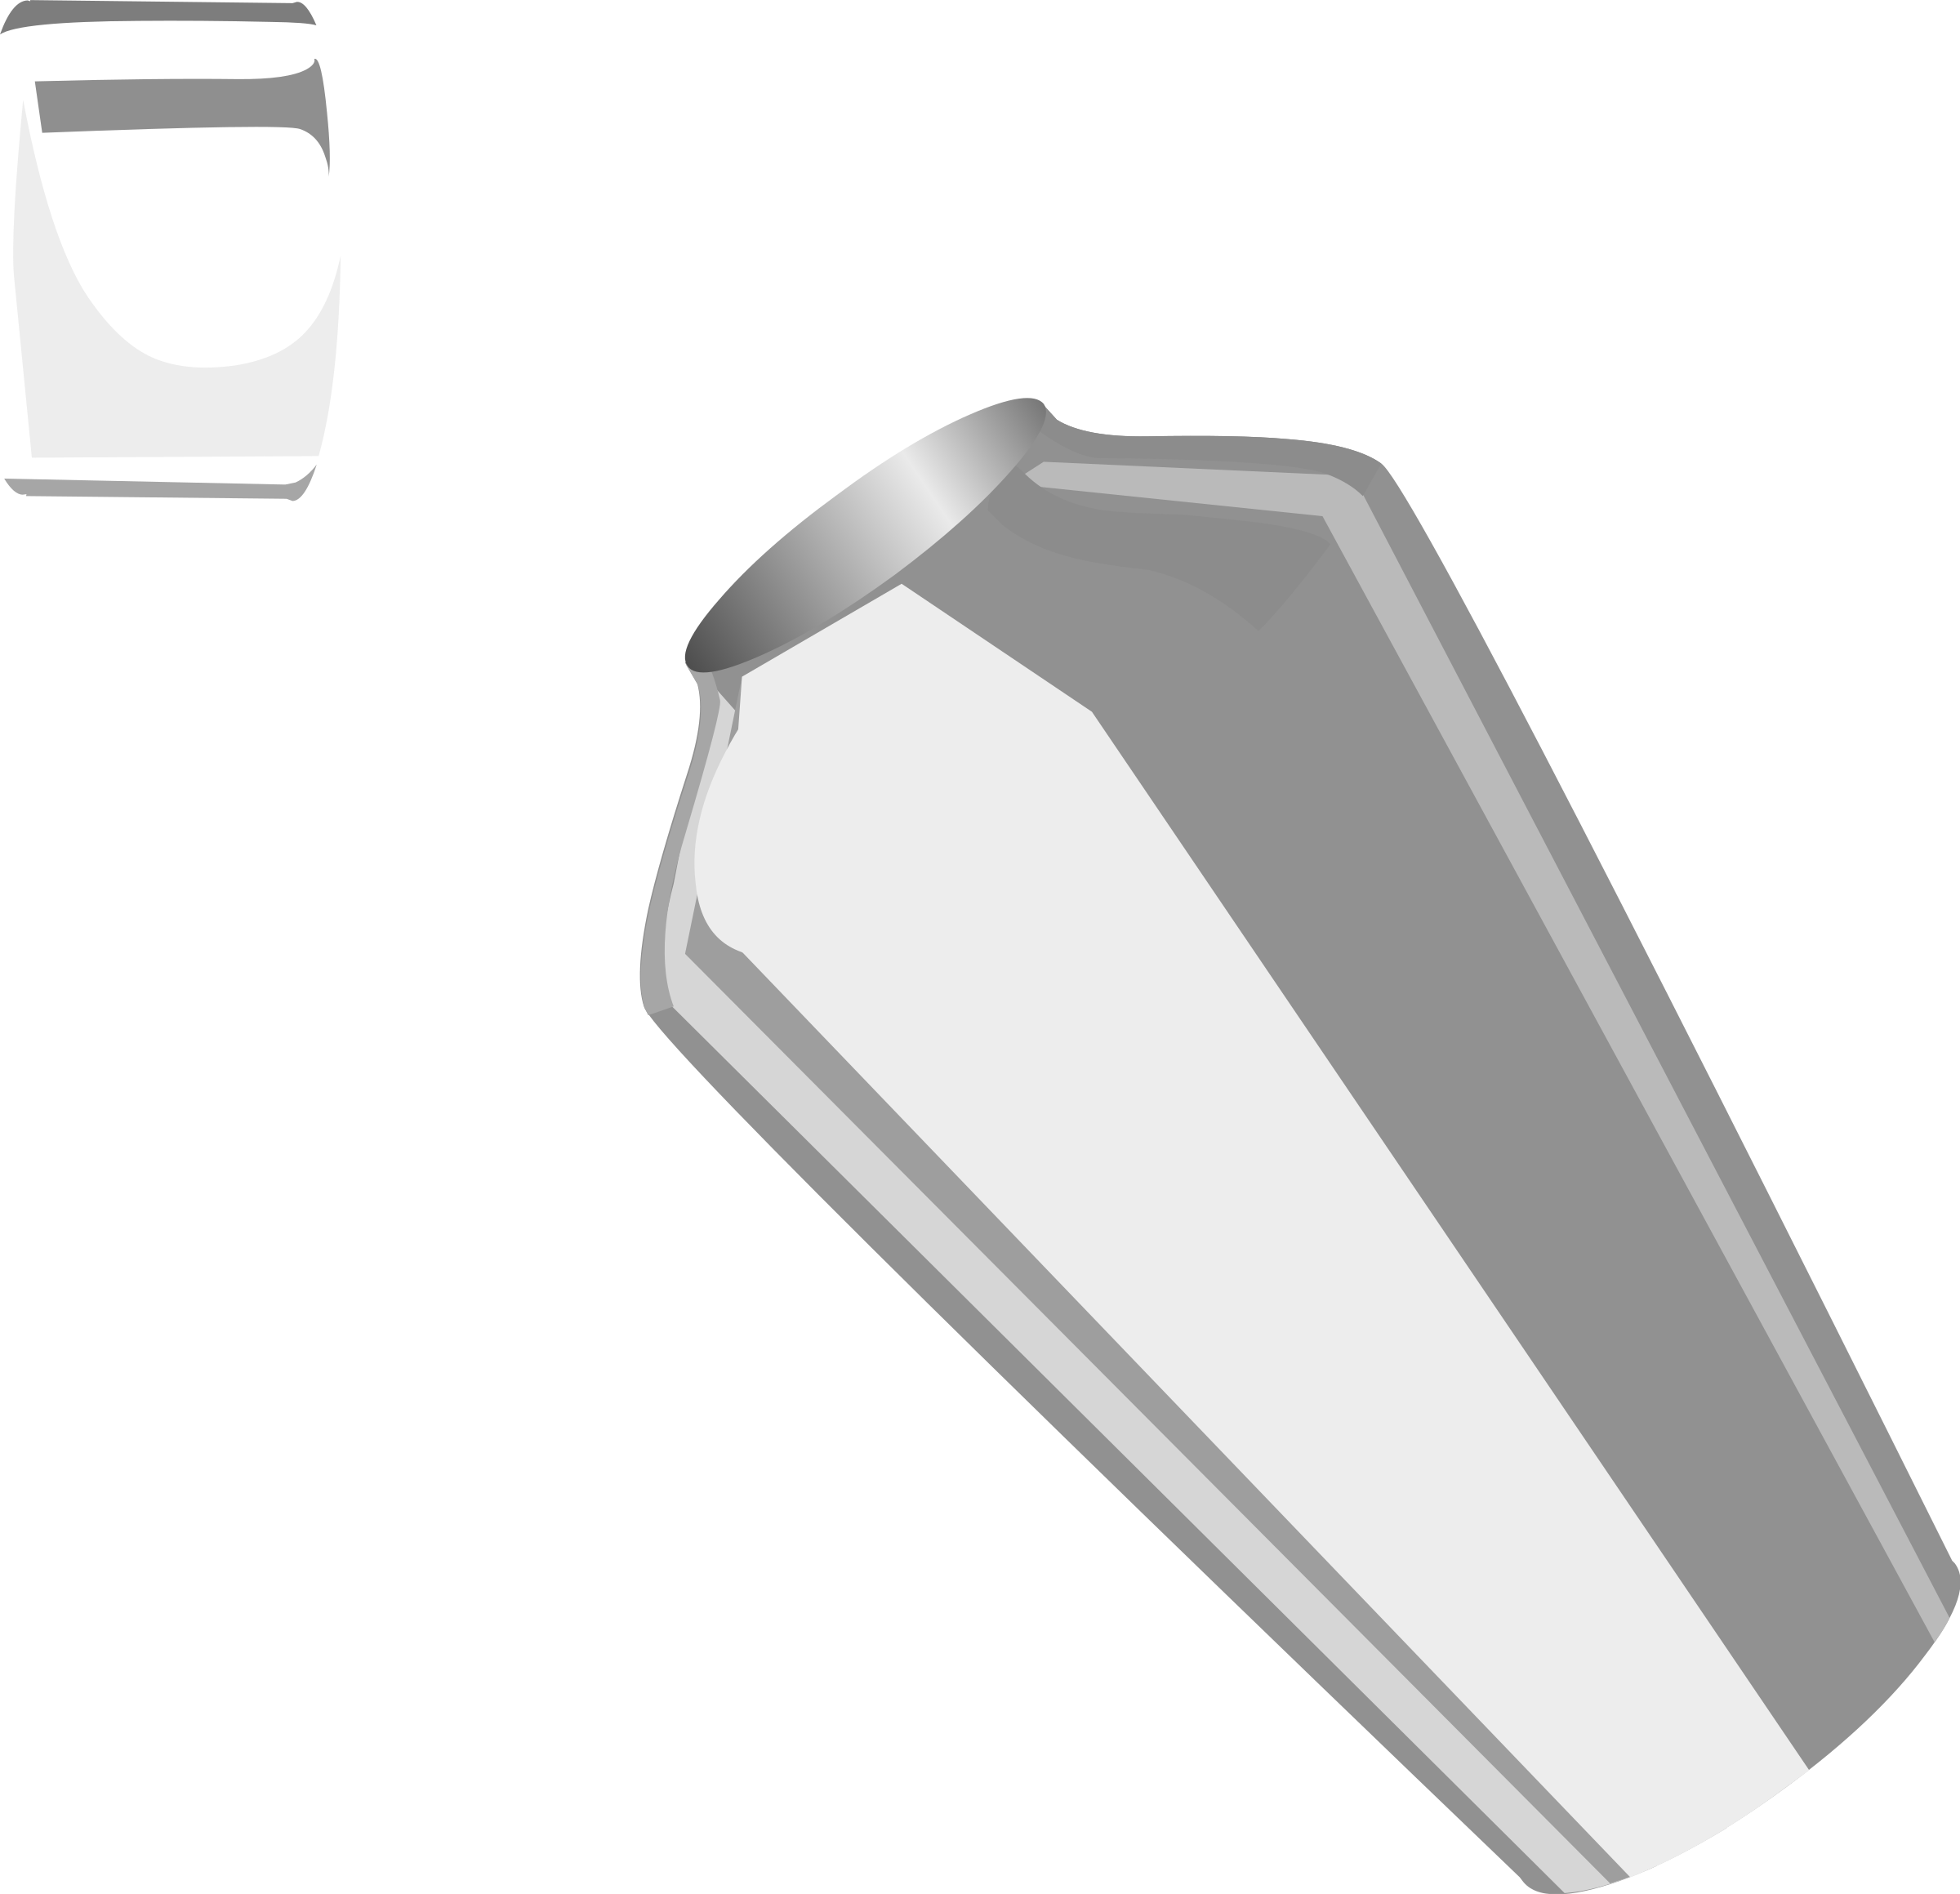 cocktail clipart outline